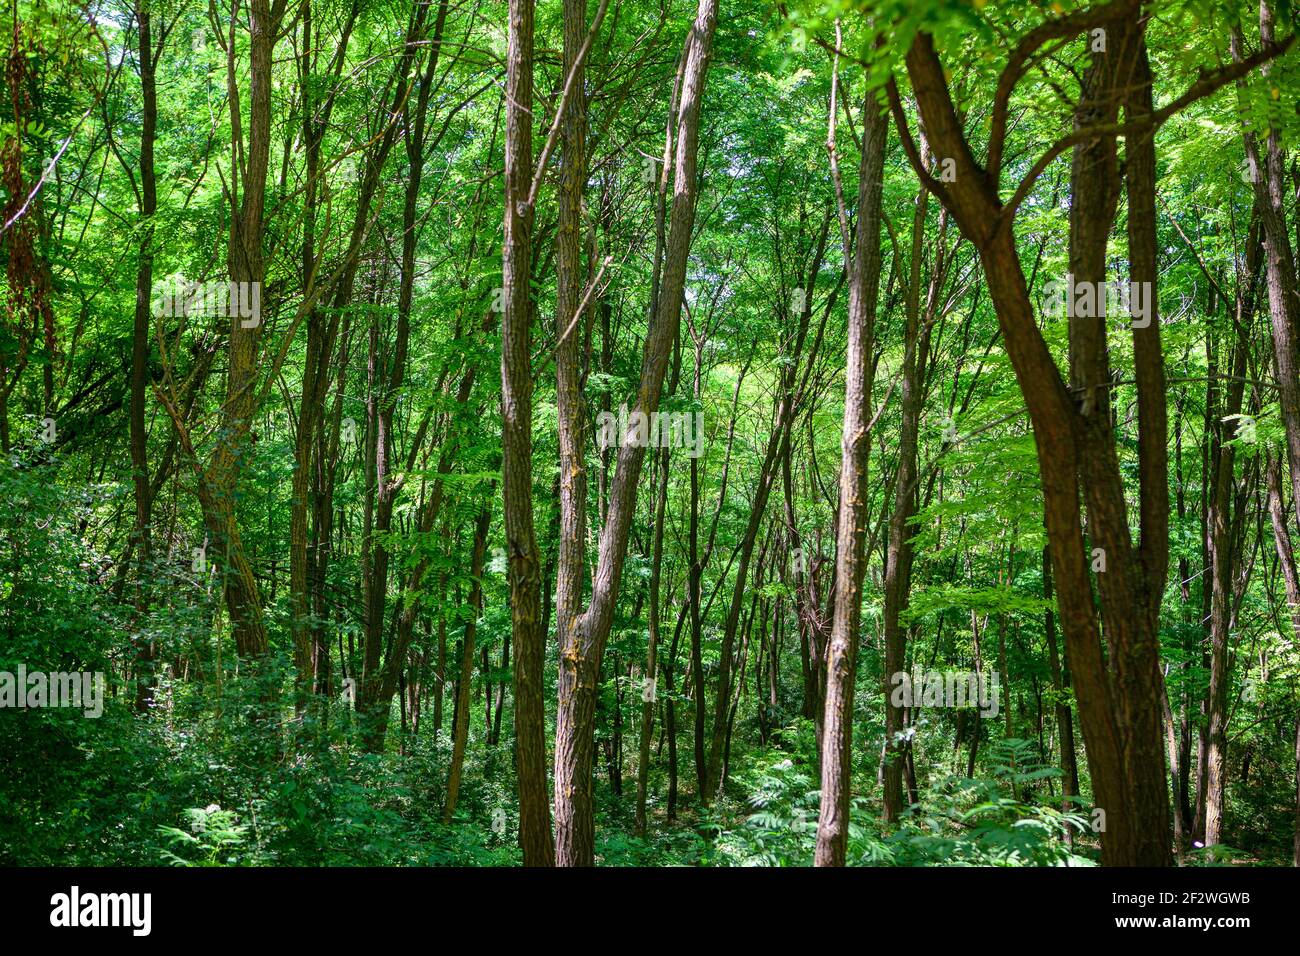 Acacia forest with green trees . Spring season woodland Stock Photo